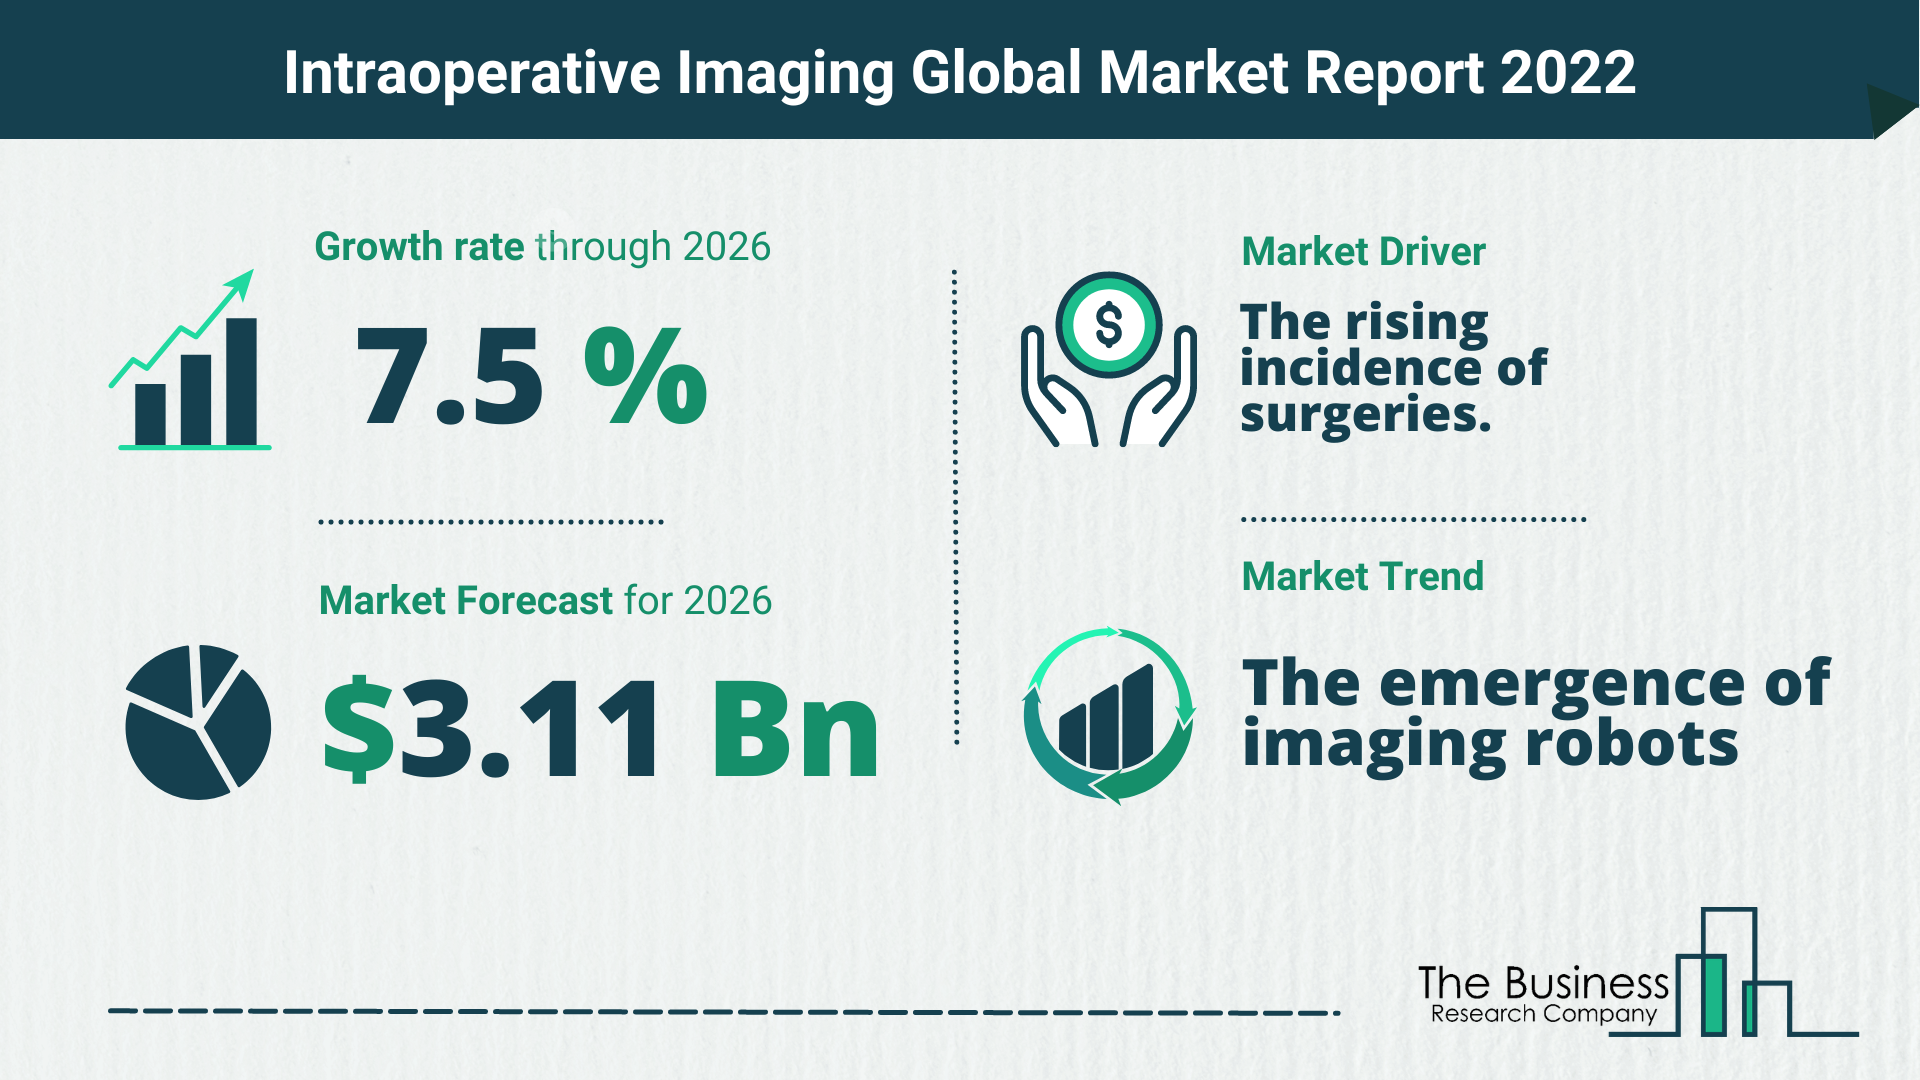 The Intraoperative Imaging Market Share, Market Size, And Growth Rate 2022